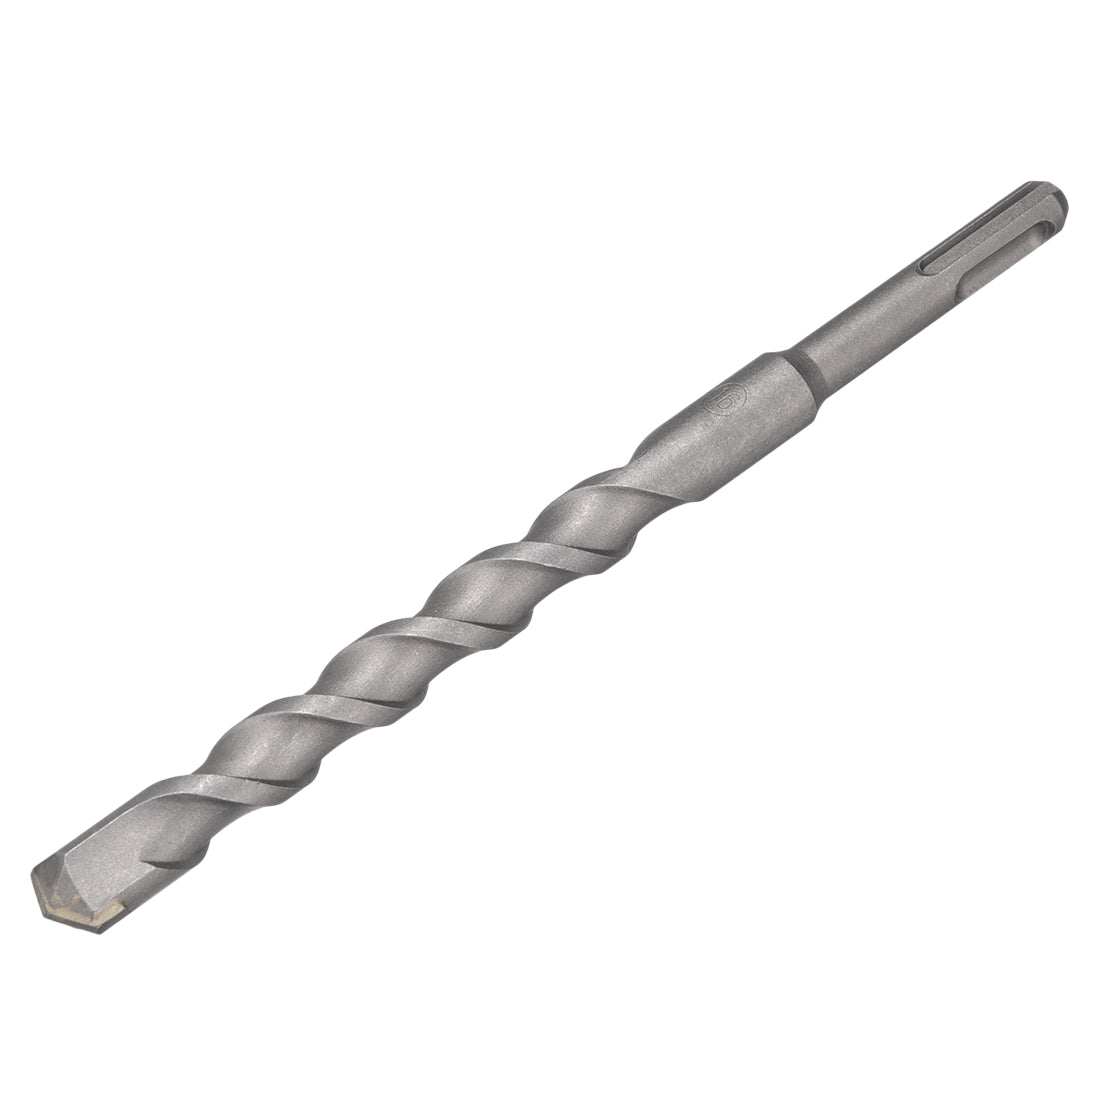 uxcell Uxcell Masonry Drill Bit 16mmx200mm 9mm Round Shank for Impact Drill